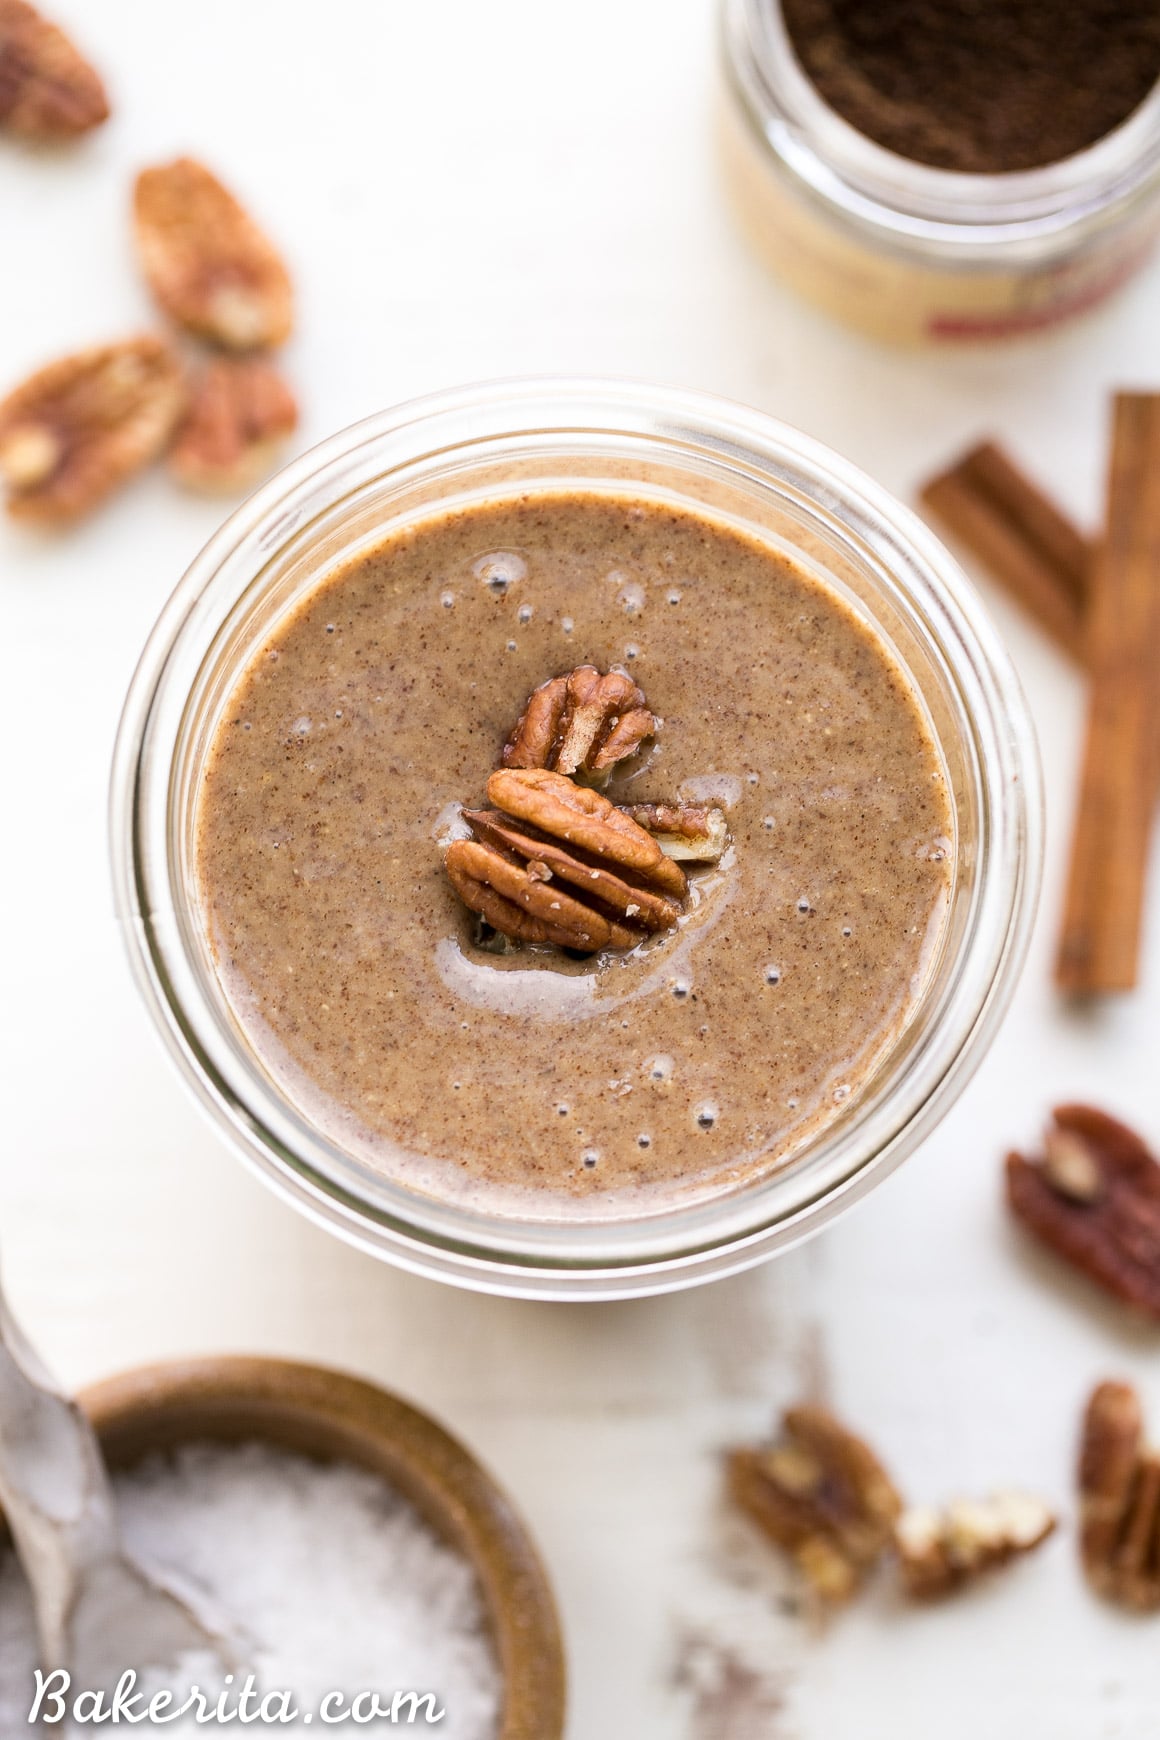 This Vanilla Bean Pecan Butter is incredibly smooth and easy to make. The buttery pecans blend up quickly into a creamy nut butter that you'll want to spread on everything! Cinnamon and vanilla beans complement the pecans wonderfully.